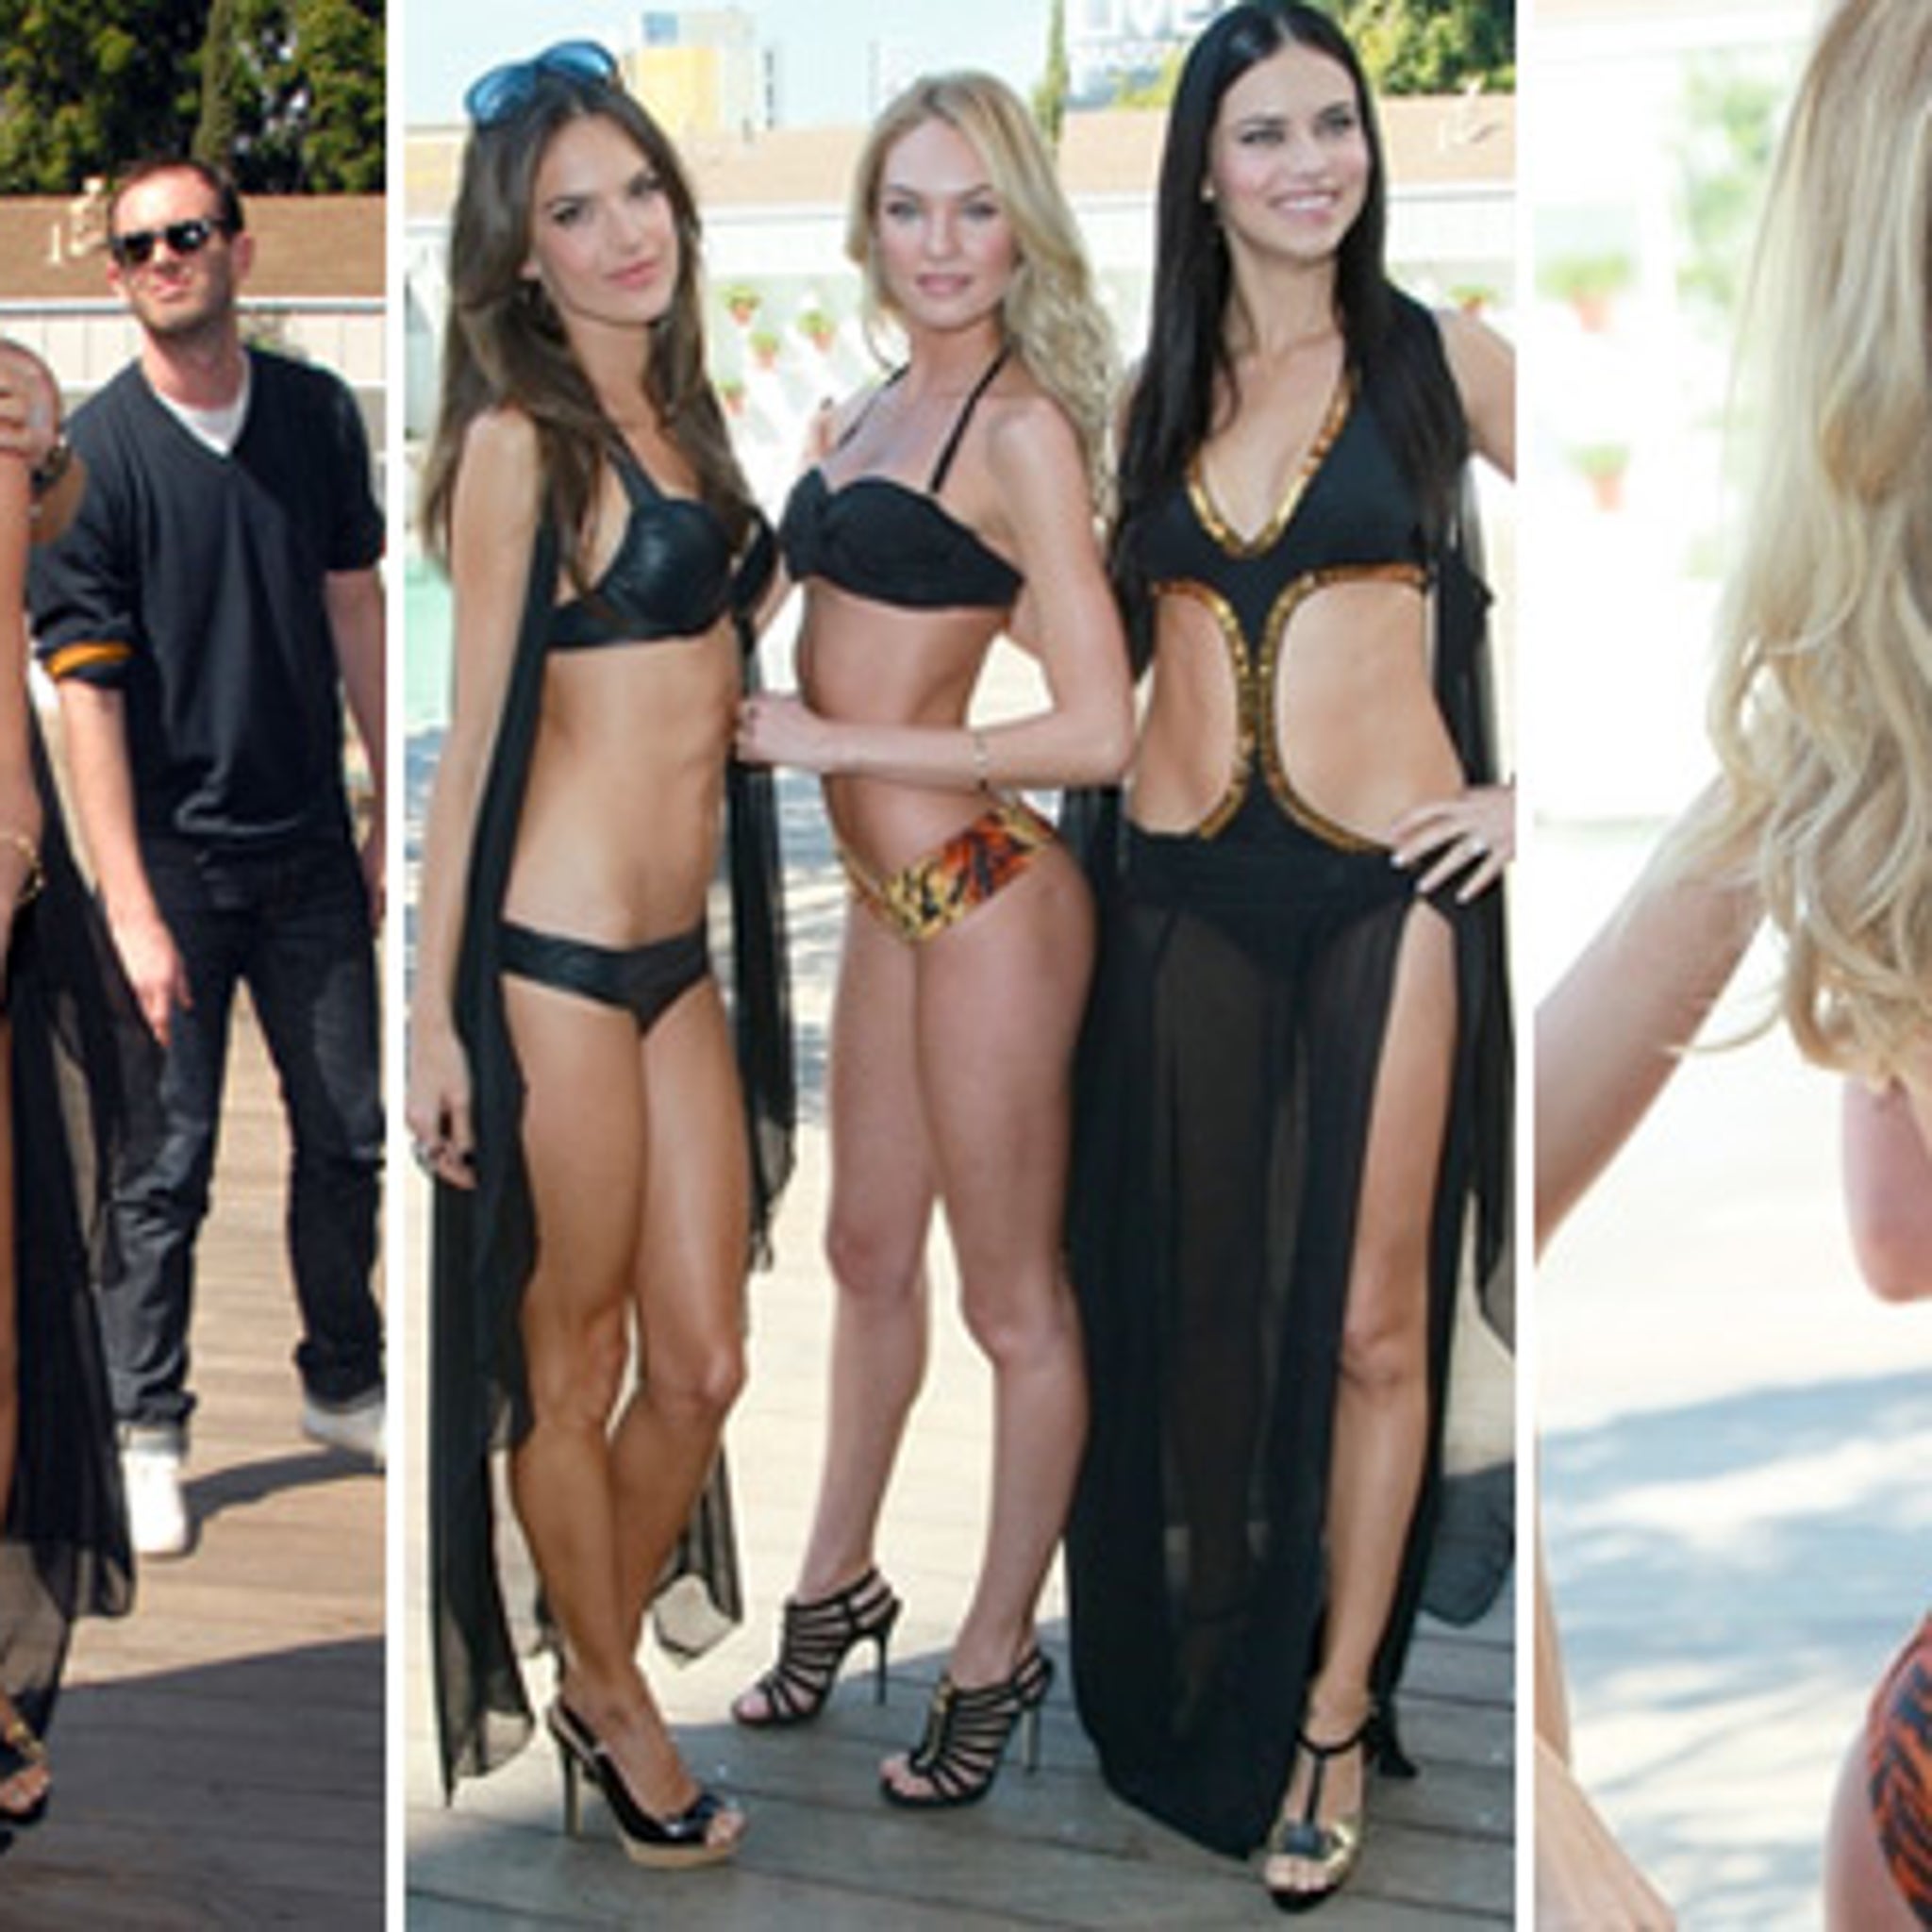 Is Candice Swanepoel Too Thin To Model Swimsuits? Let's Discuss